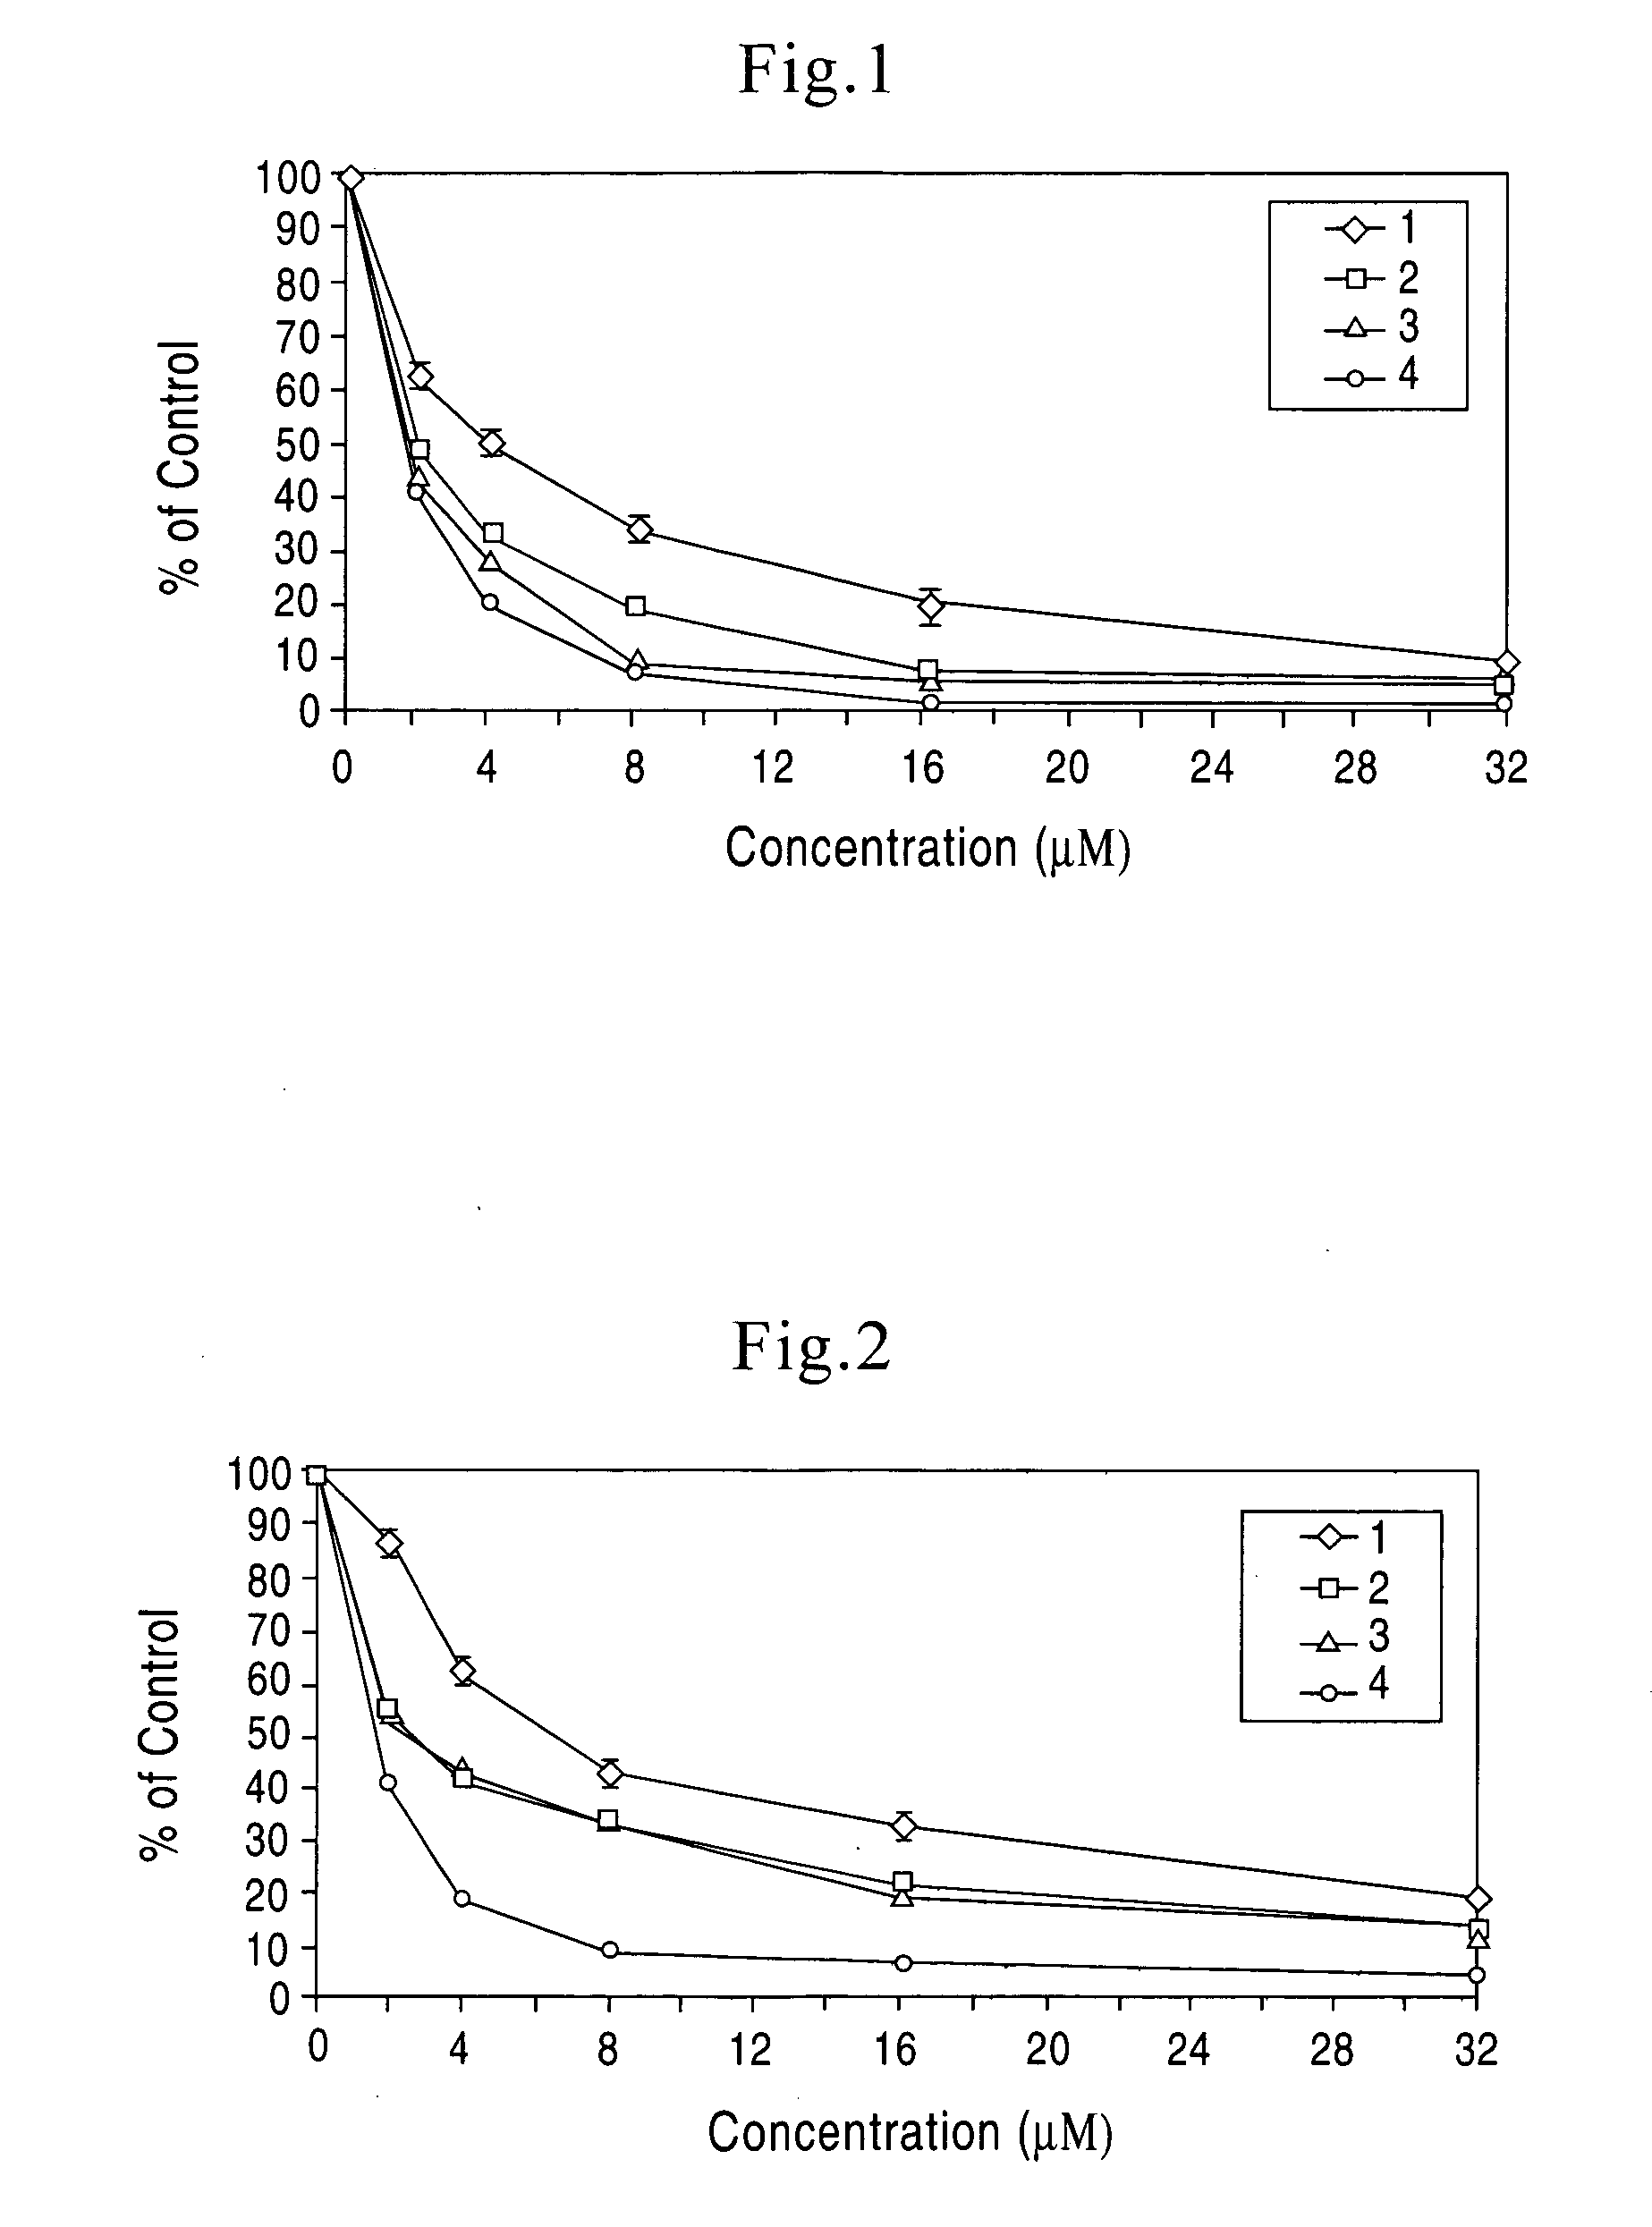 Compositions of boswellic acids derived from Boswellia serrata gum resin, for treating lymphoproliferative and autoimmune conditions